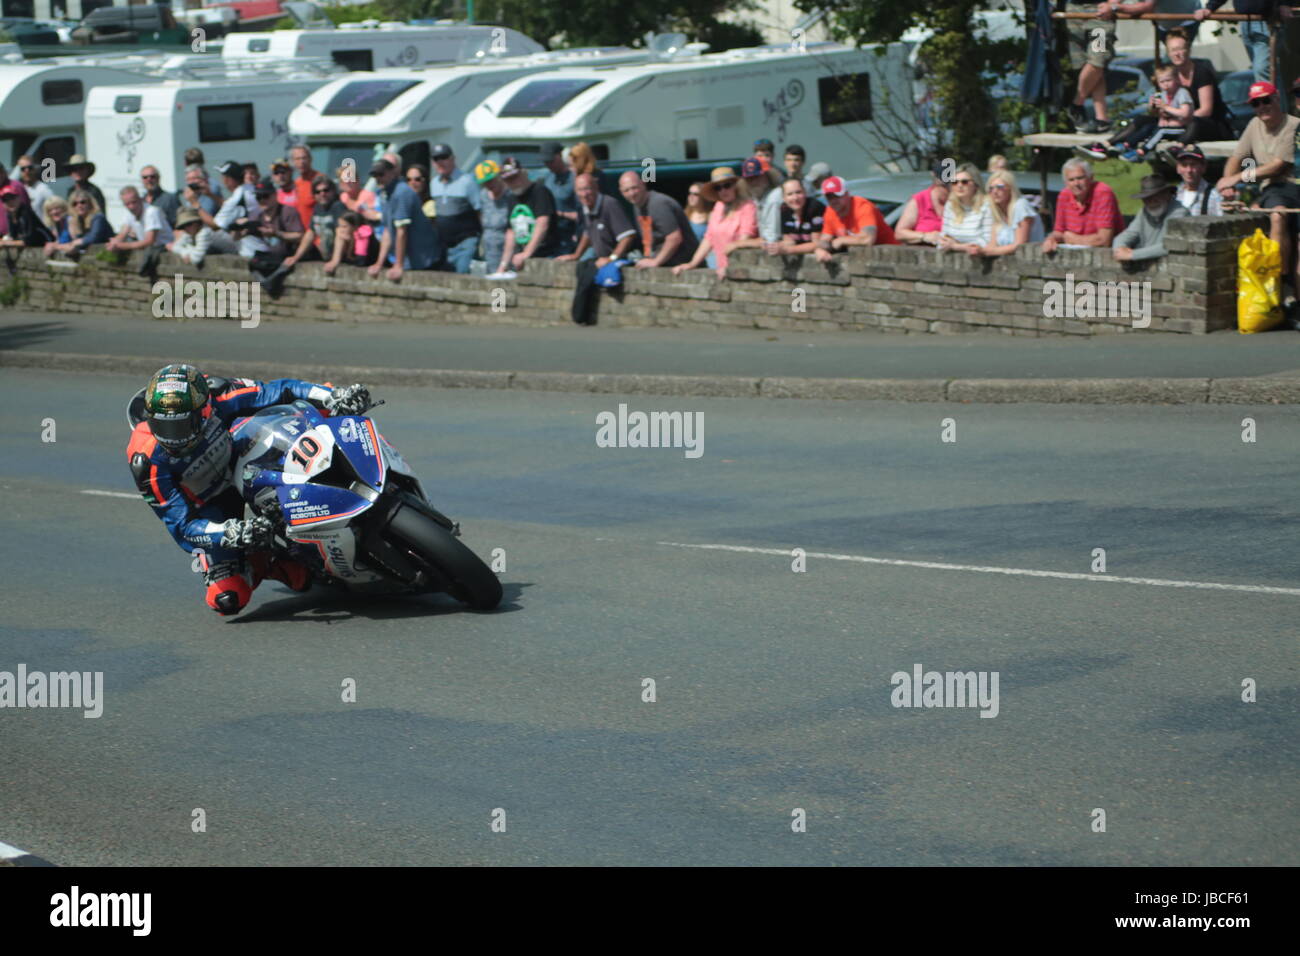 Isle Of Man, British Isles (UK). 9th June, 2017.  Fan Favorite and rising star, number 10, Peter Hickman on his BMW motorcycle of the Smiths Racing team at Cruickshank's Corner, Ramsey, Isle of Man, UK.  Peter Hickman came second in the Senior TT race in an exciting climax to the TT Races. Pokerstars Senior TT Race. (Detailed competitor information: https://www.iomtt.com/TT-Database.aspx) Credit: Louisa Jane Bawden/Alamy Live News. Stock Photo